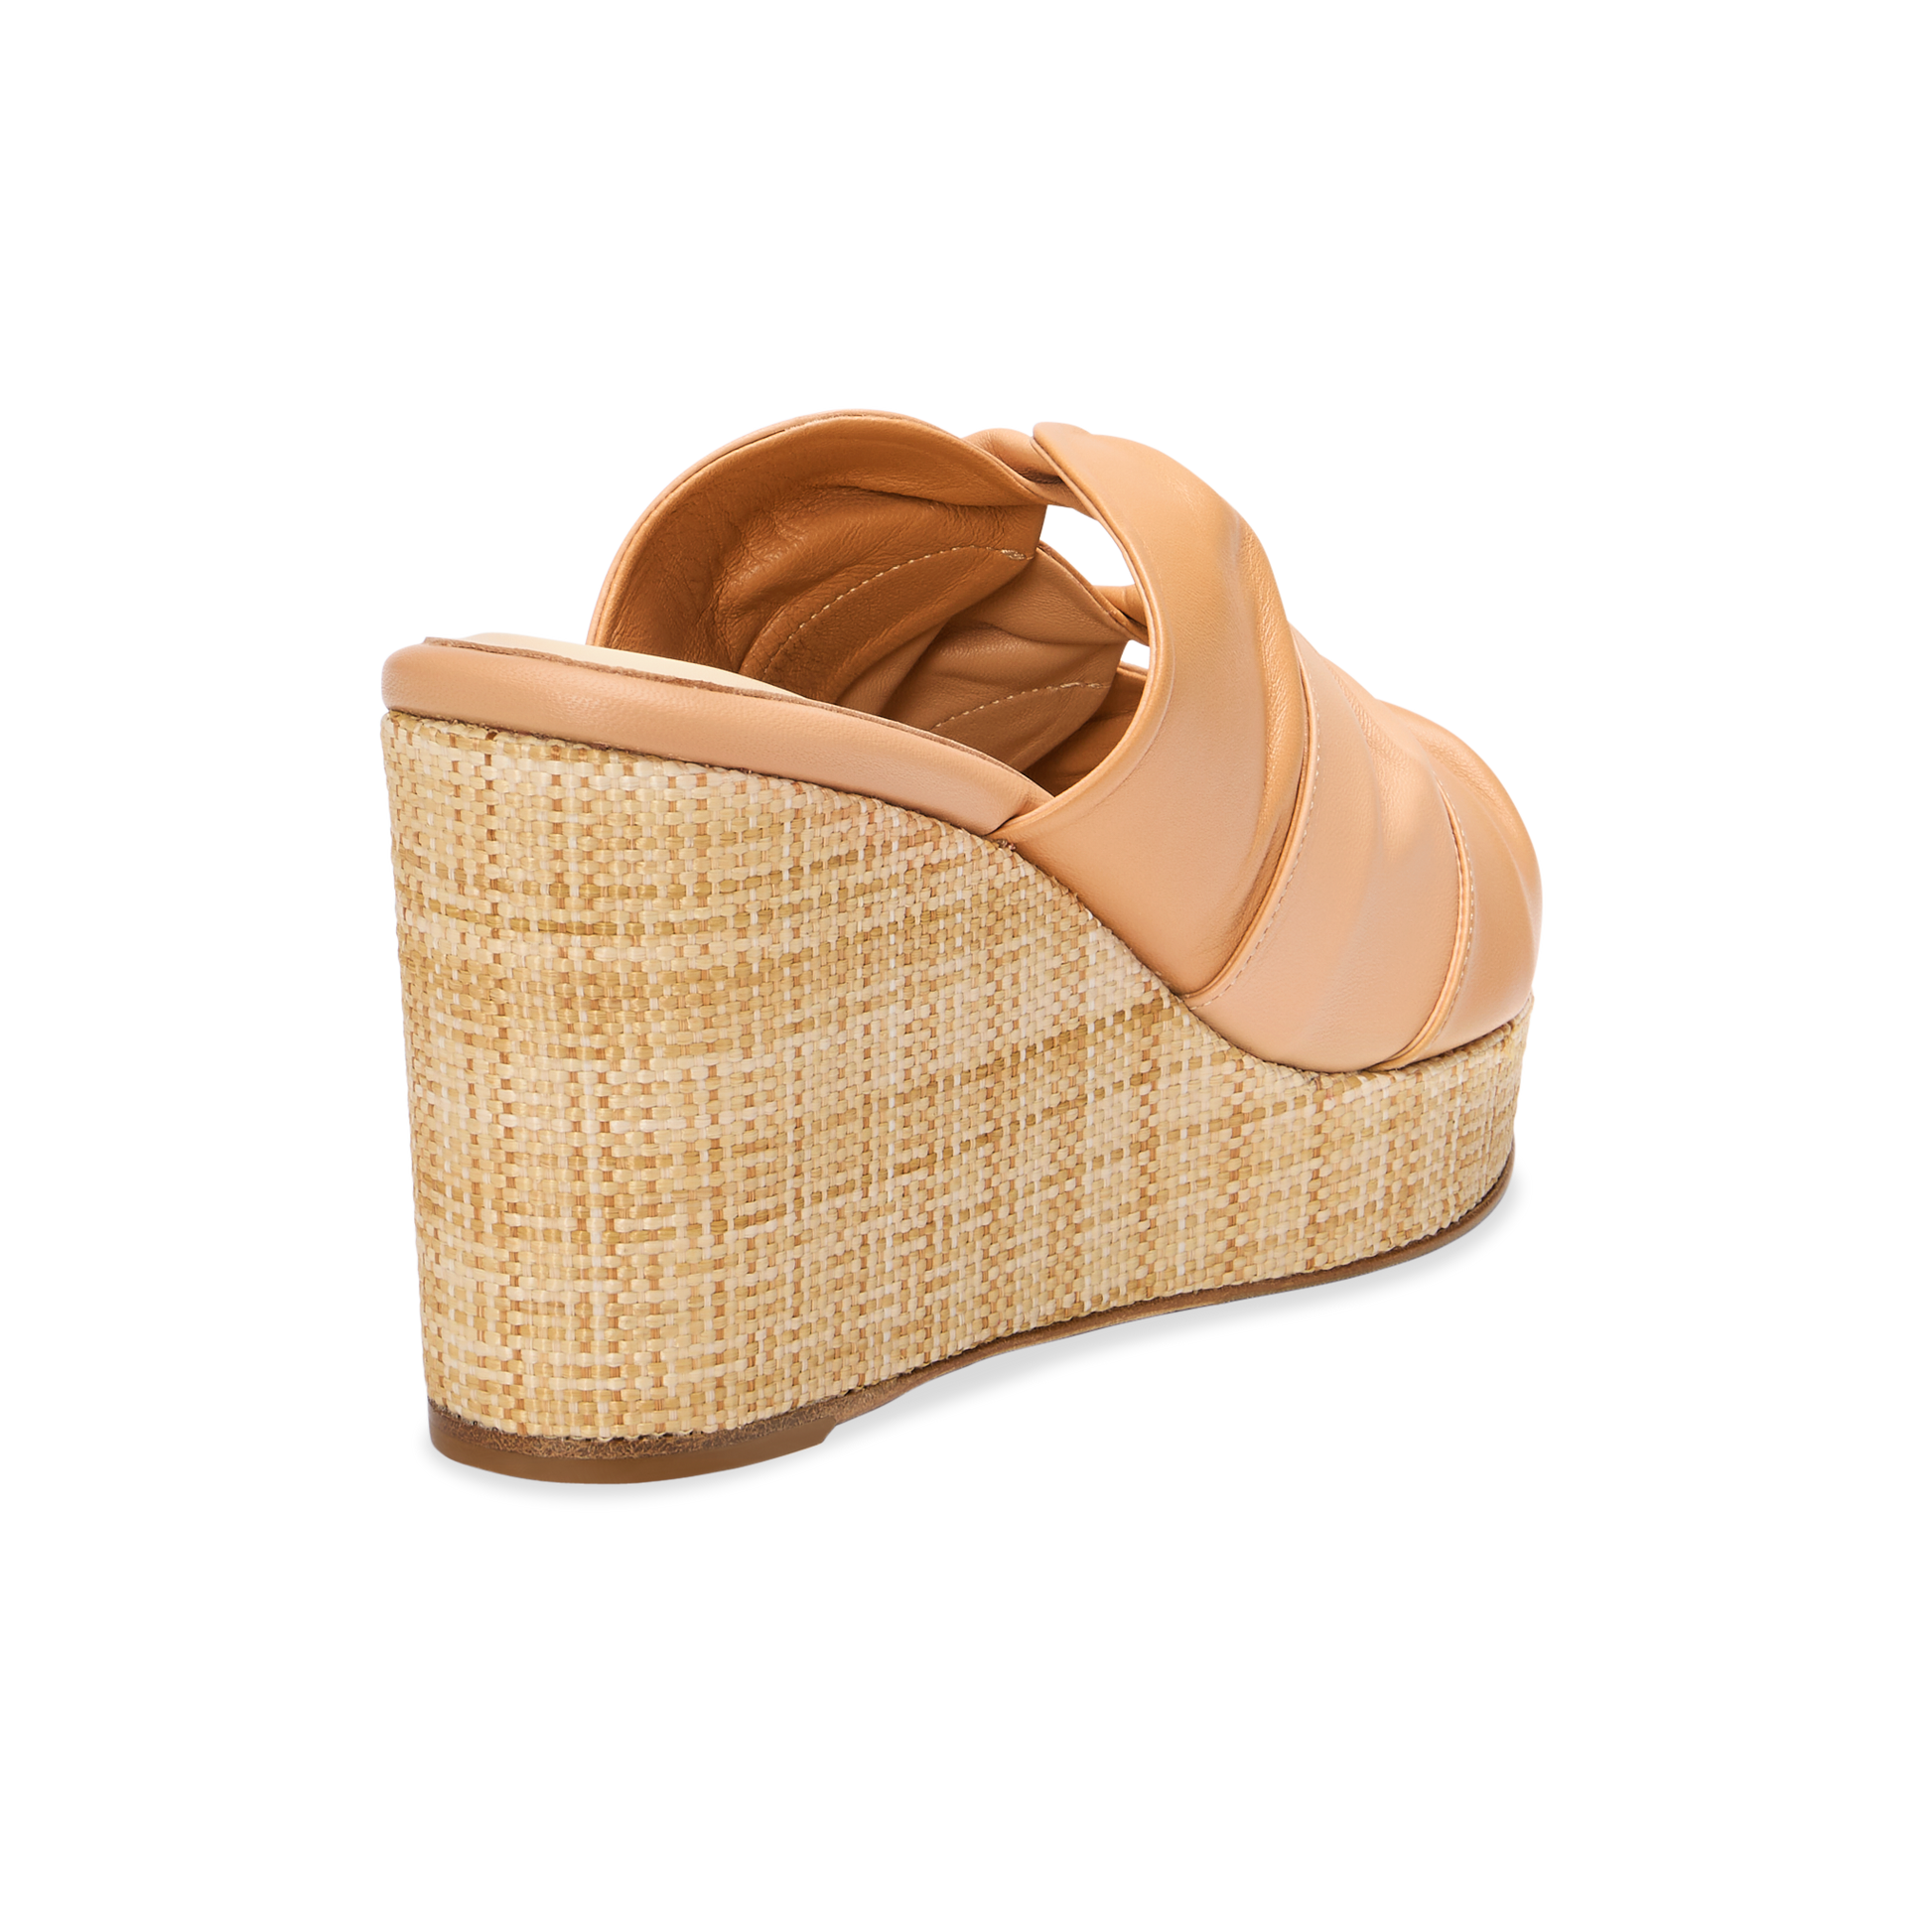 Perfect Arabesque Wedge 80 in Two-Tone Camel Nappa & Woven Wedge